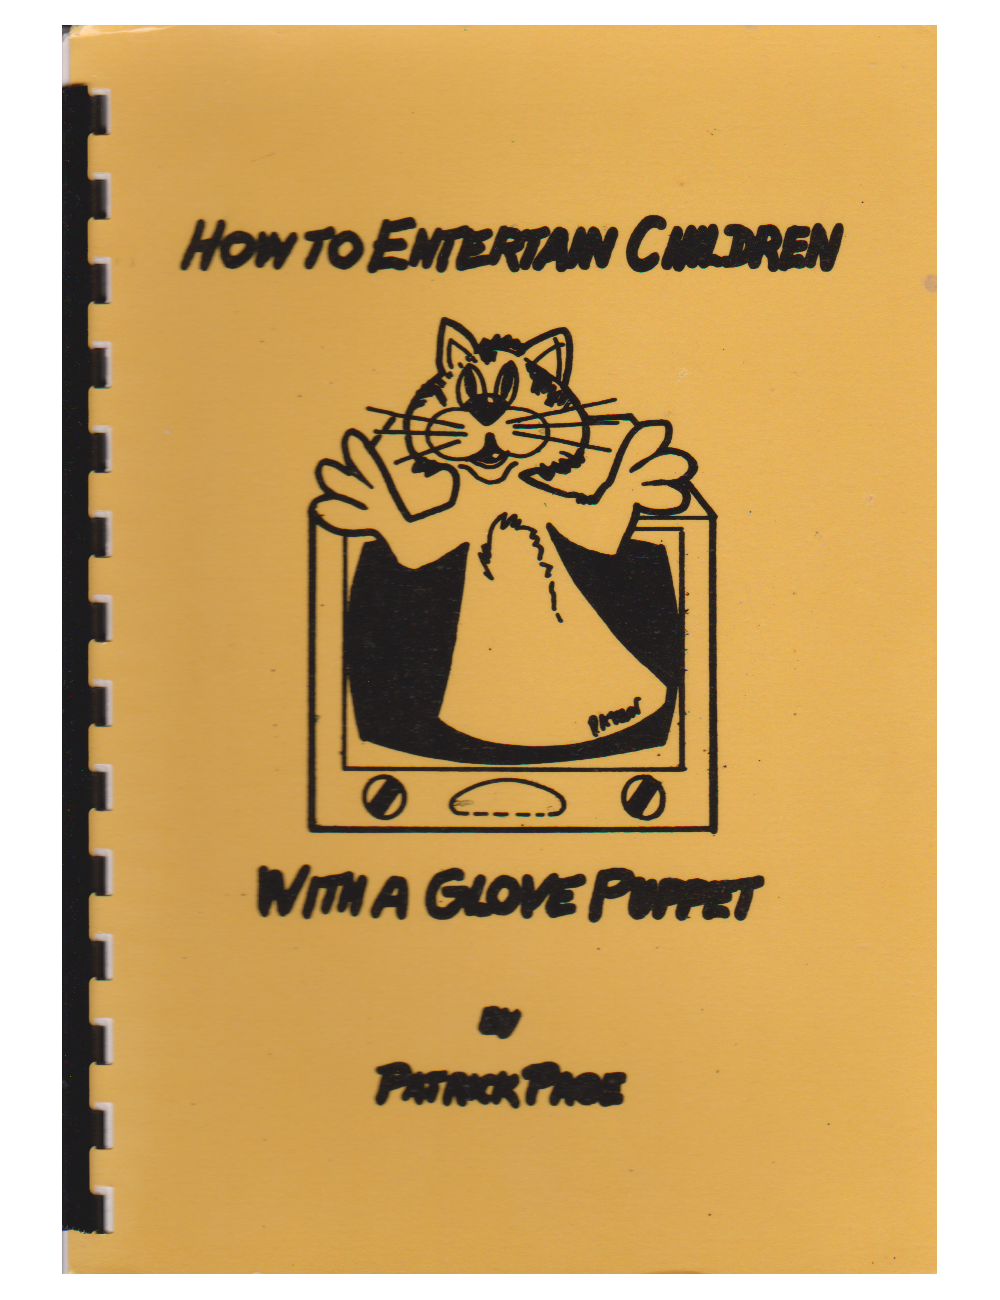 HOW TO ENTERTAIN CHILDREN WITH A GLOVE PUPPET (Patrick Page)